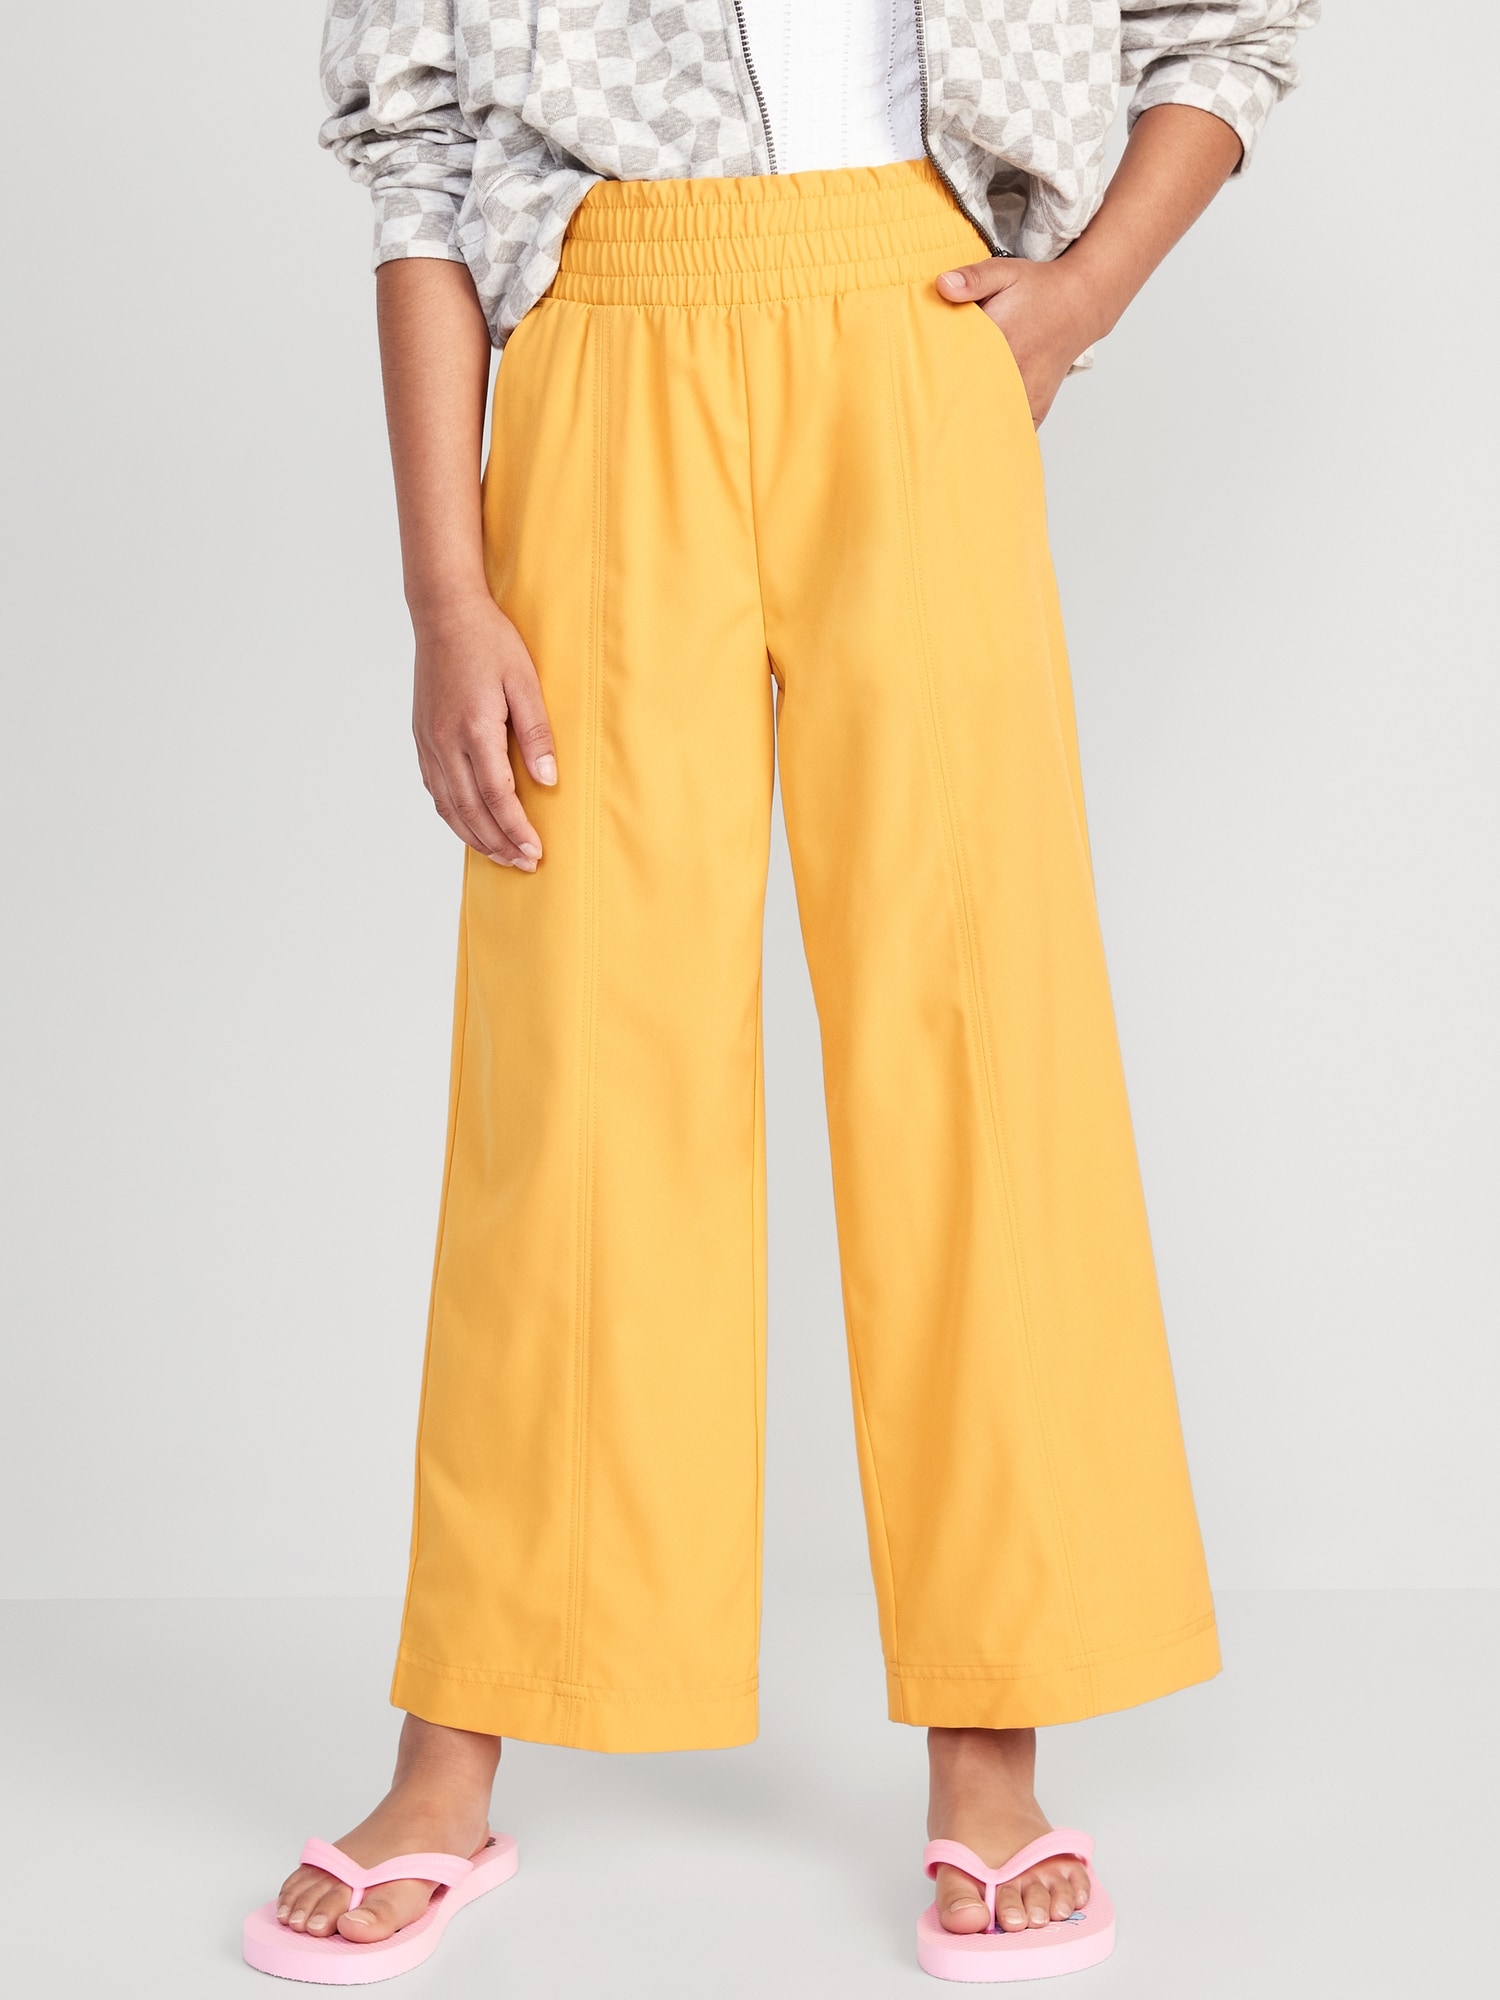 Old Navy StretchTech High-Waisted Wide-Leg Performance Pants for Girls yellow. 1